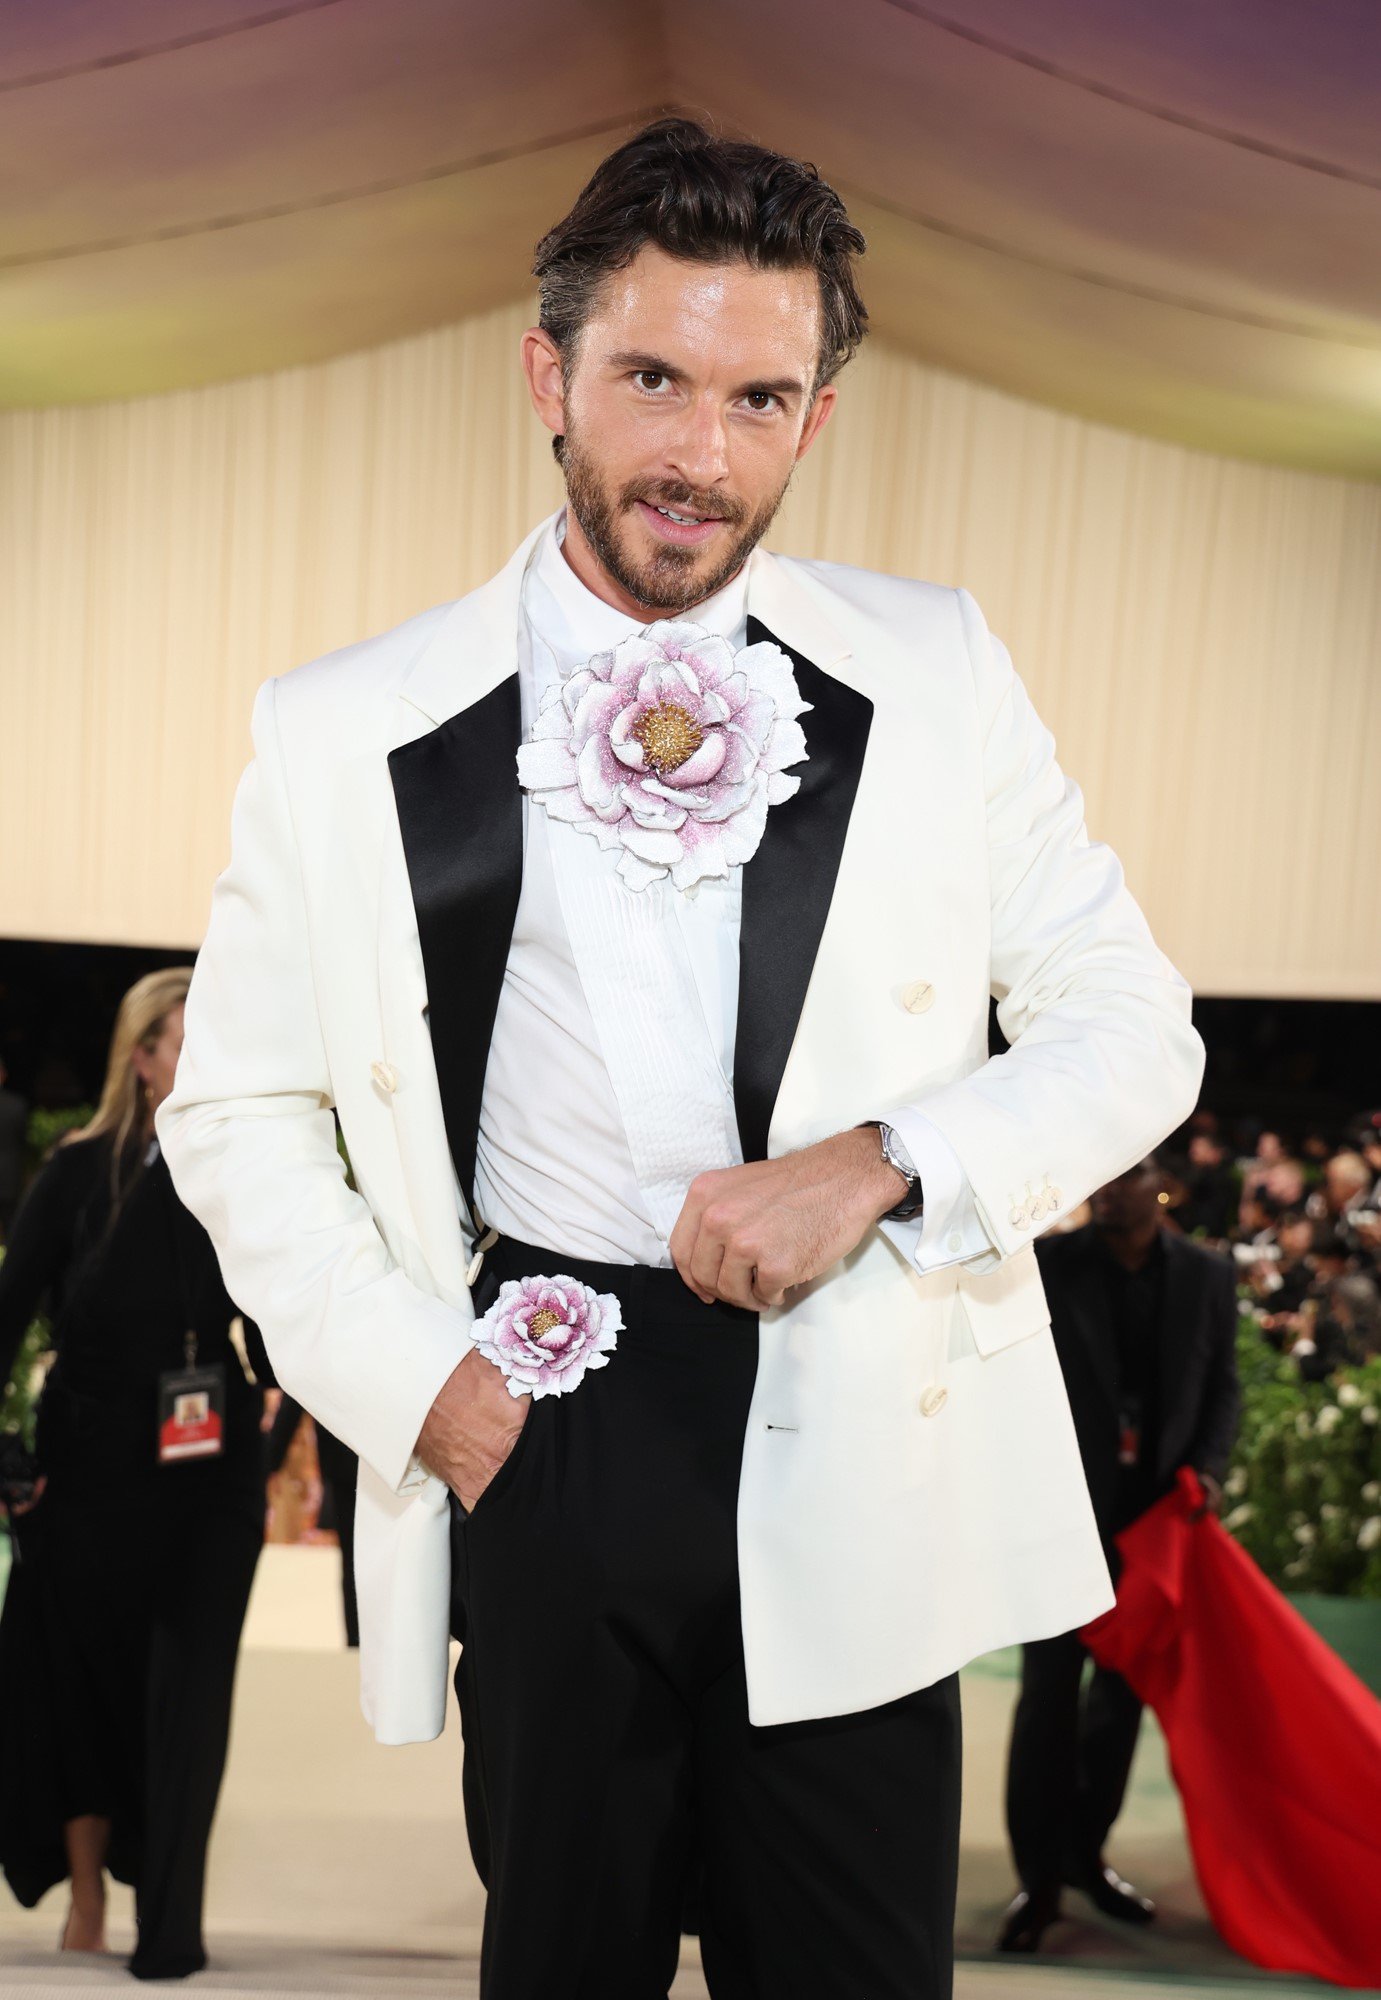 Jonathan wears a white blazer with a flower on his chest and in his pocket.